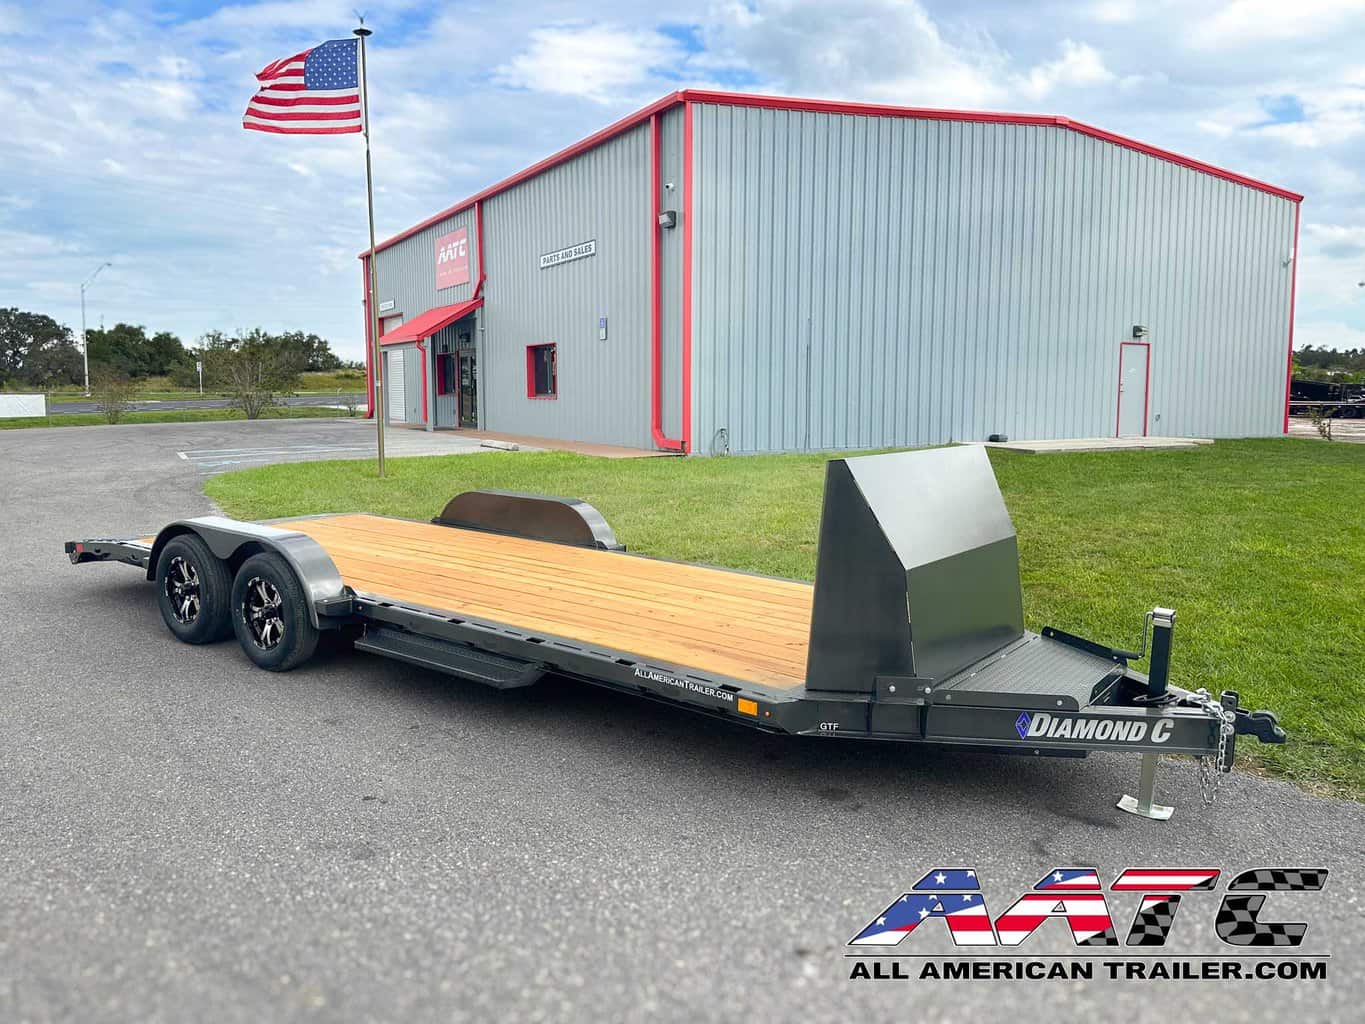 A versatile and durable 20-foot single car hauler from Diamond C, model GTF-18+2. This Diamond C Trailer is designed for open car hauling, with a 7,000 GVWR and 18+2 configuration featuring a steel rock shield and convenient slide-in ramps. The car hauler is 20x7 feet, equipped with electric brakes, a bumper pull design, and a metallic gray finish. It also comes with a 7,000 lb drop-leg jack, LED lights, and an adjustable coupler for added functionality and convenience.